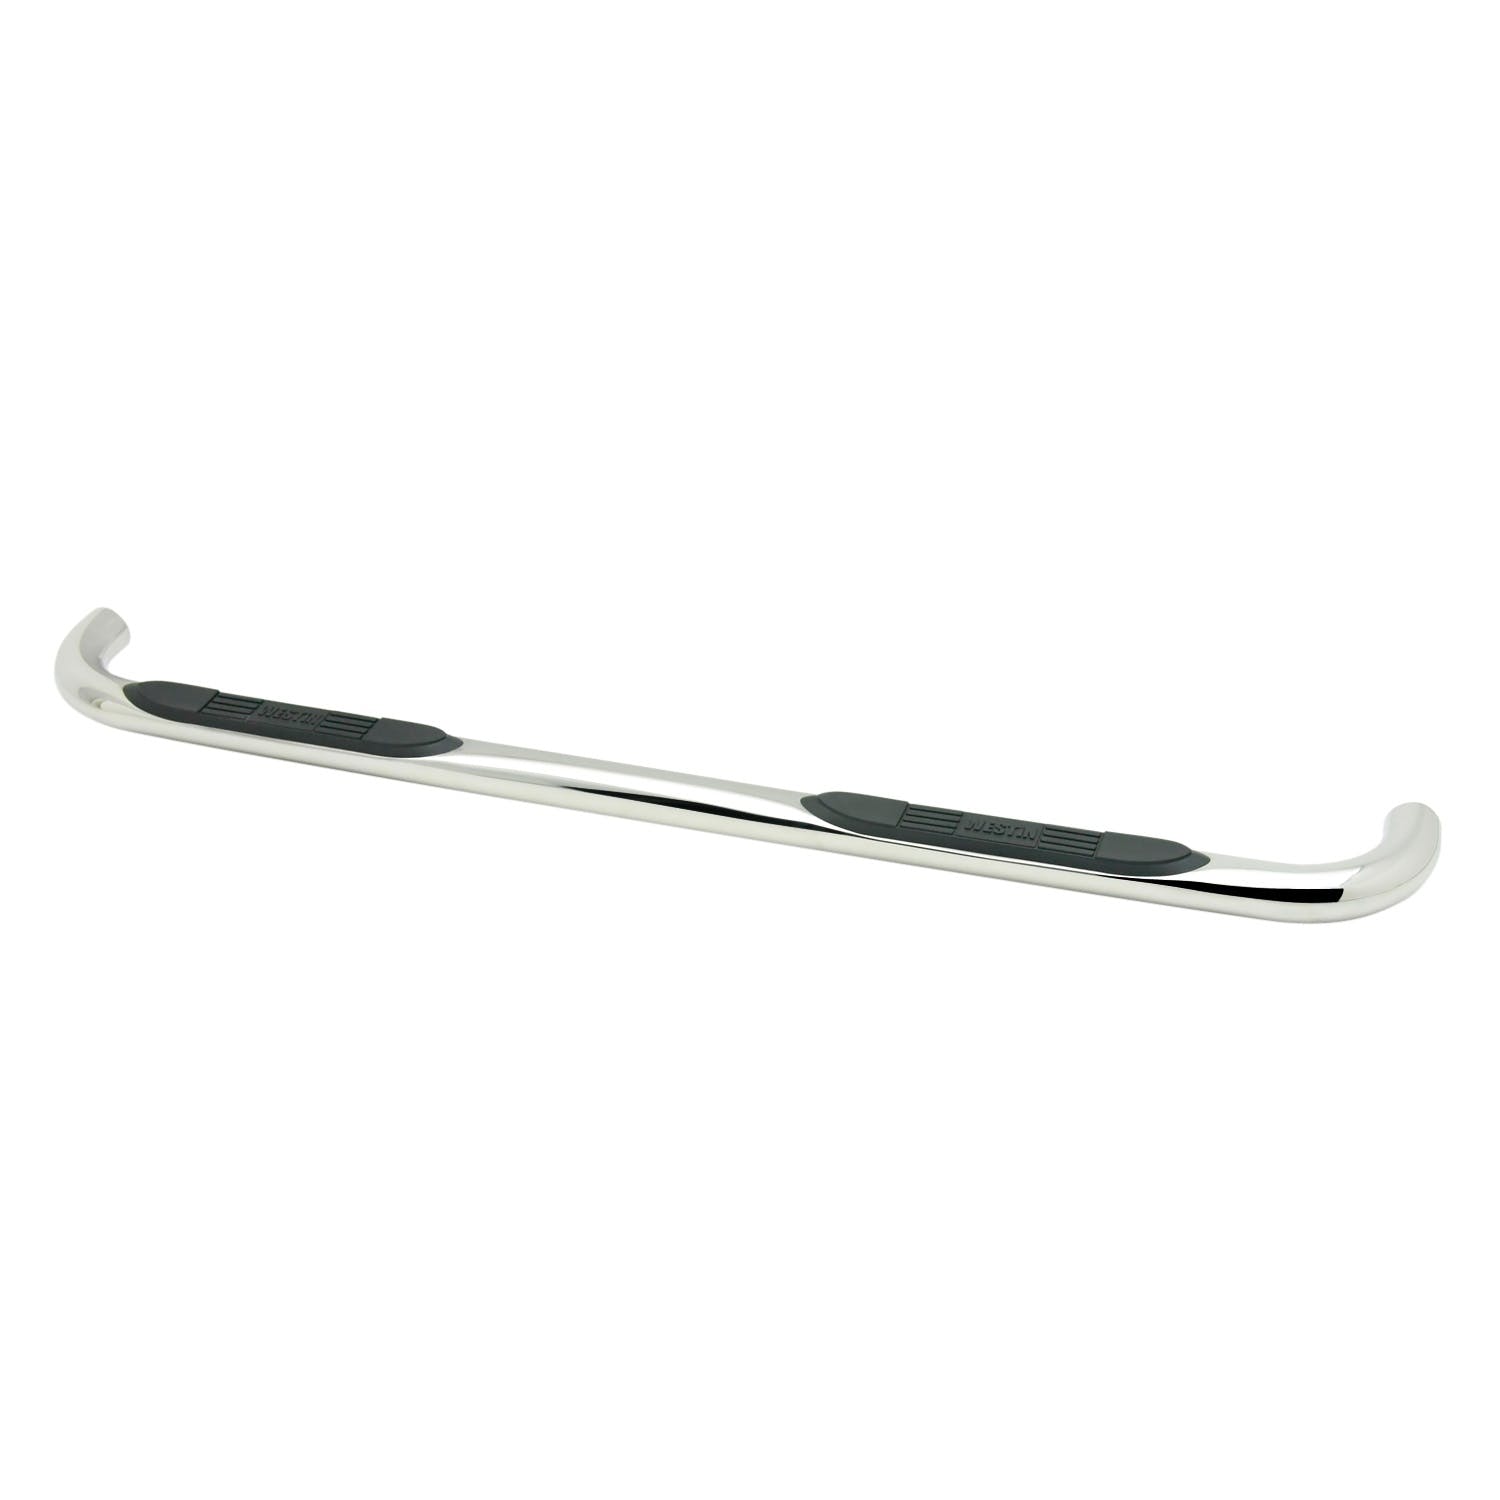 Westin Automotive 23-1880 E-Series 3 Nerf Step Bars Stainless Steel